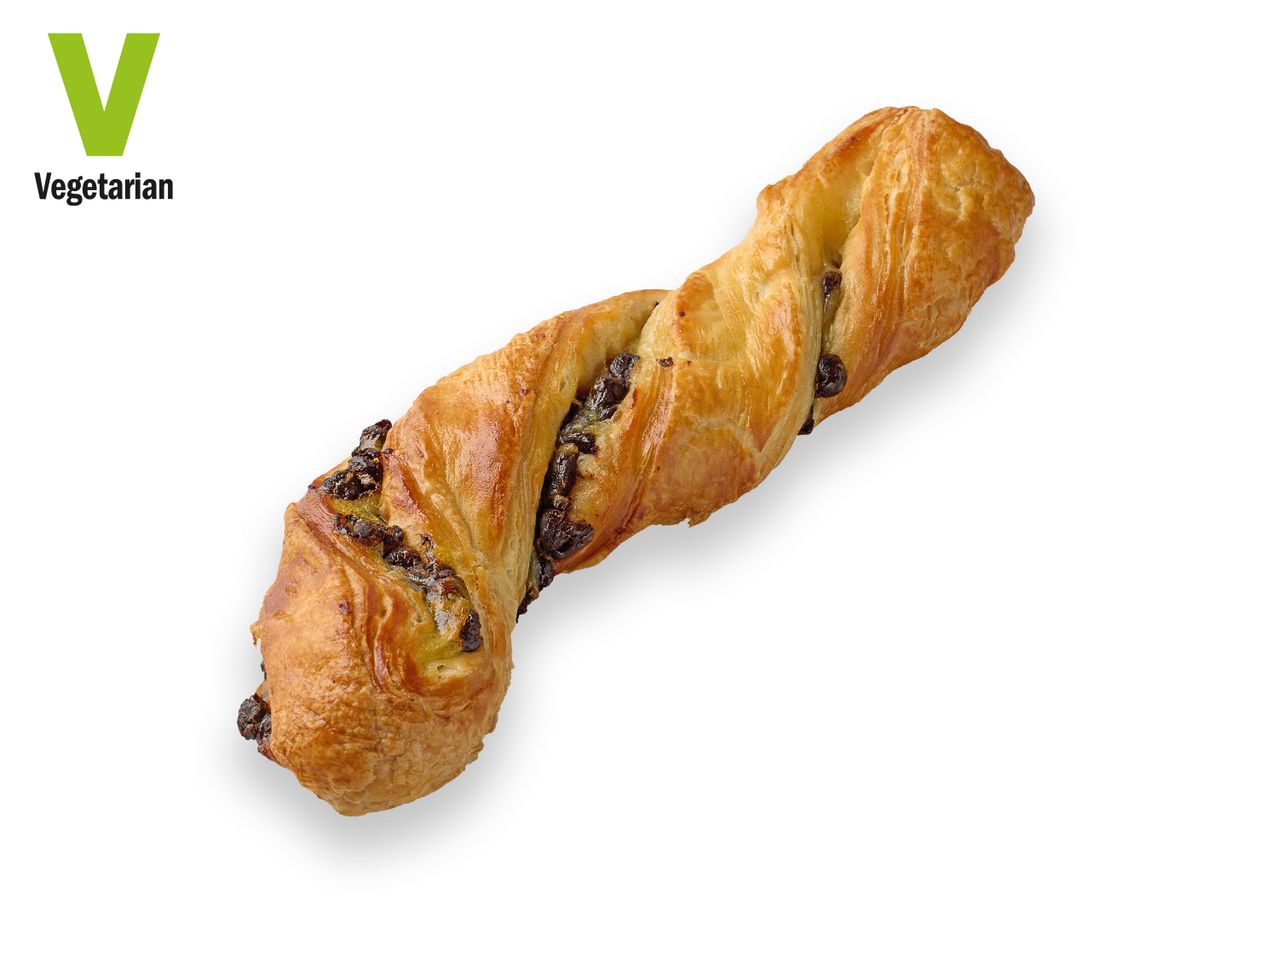 Go to full screen view: Chocolate Twist - Image 1